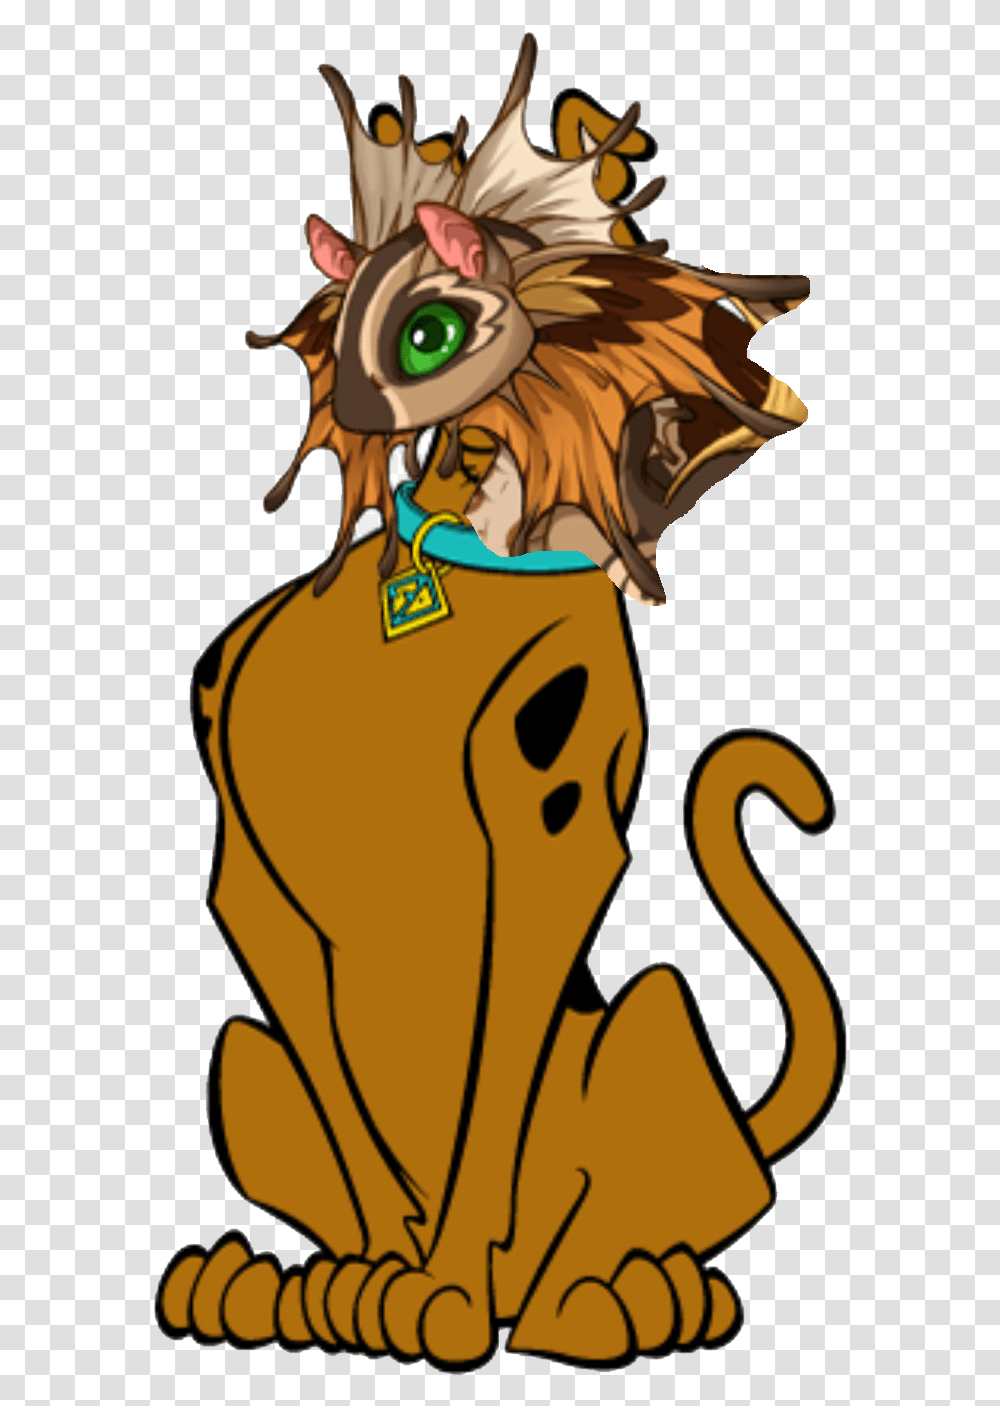 Shaggy Rogers Free Background Scooby Doo, Animal, Mammal, Wildlife Transparent Png